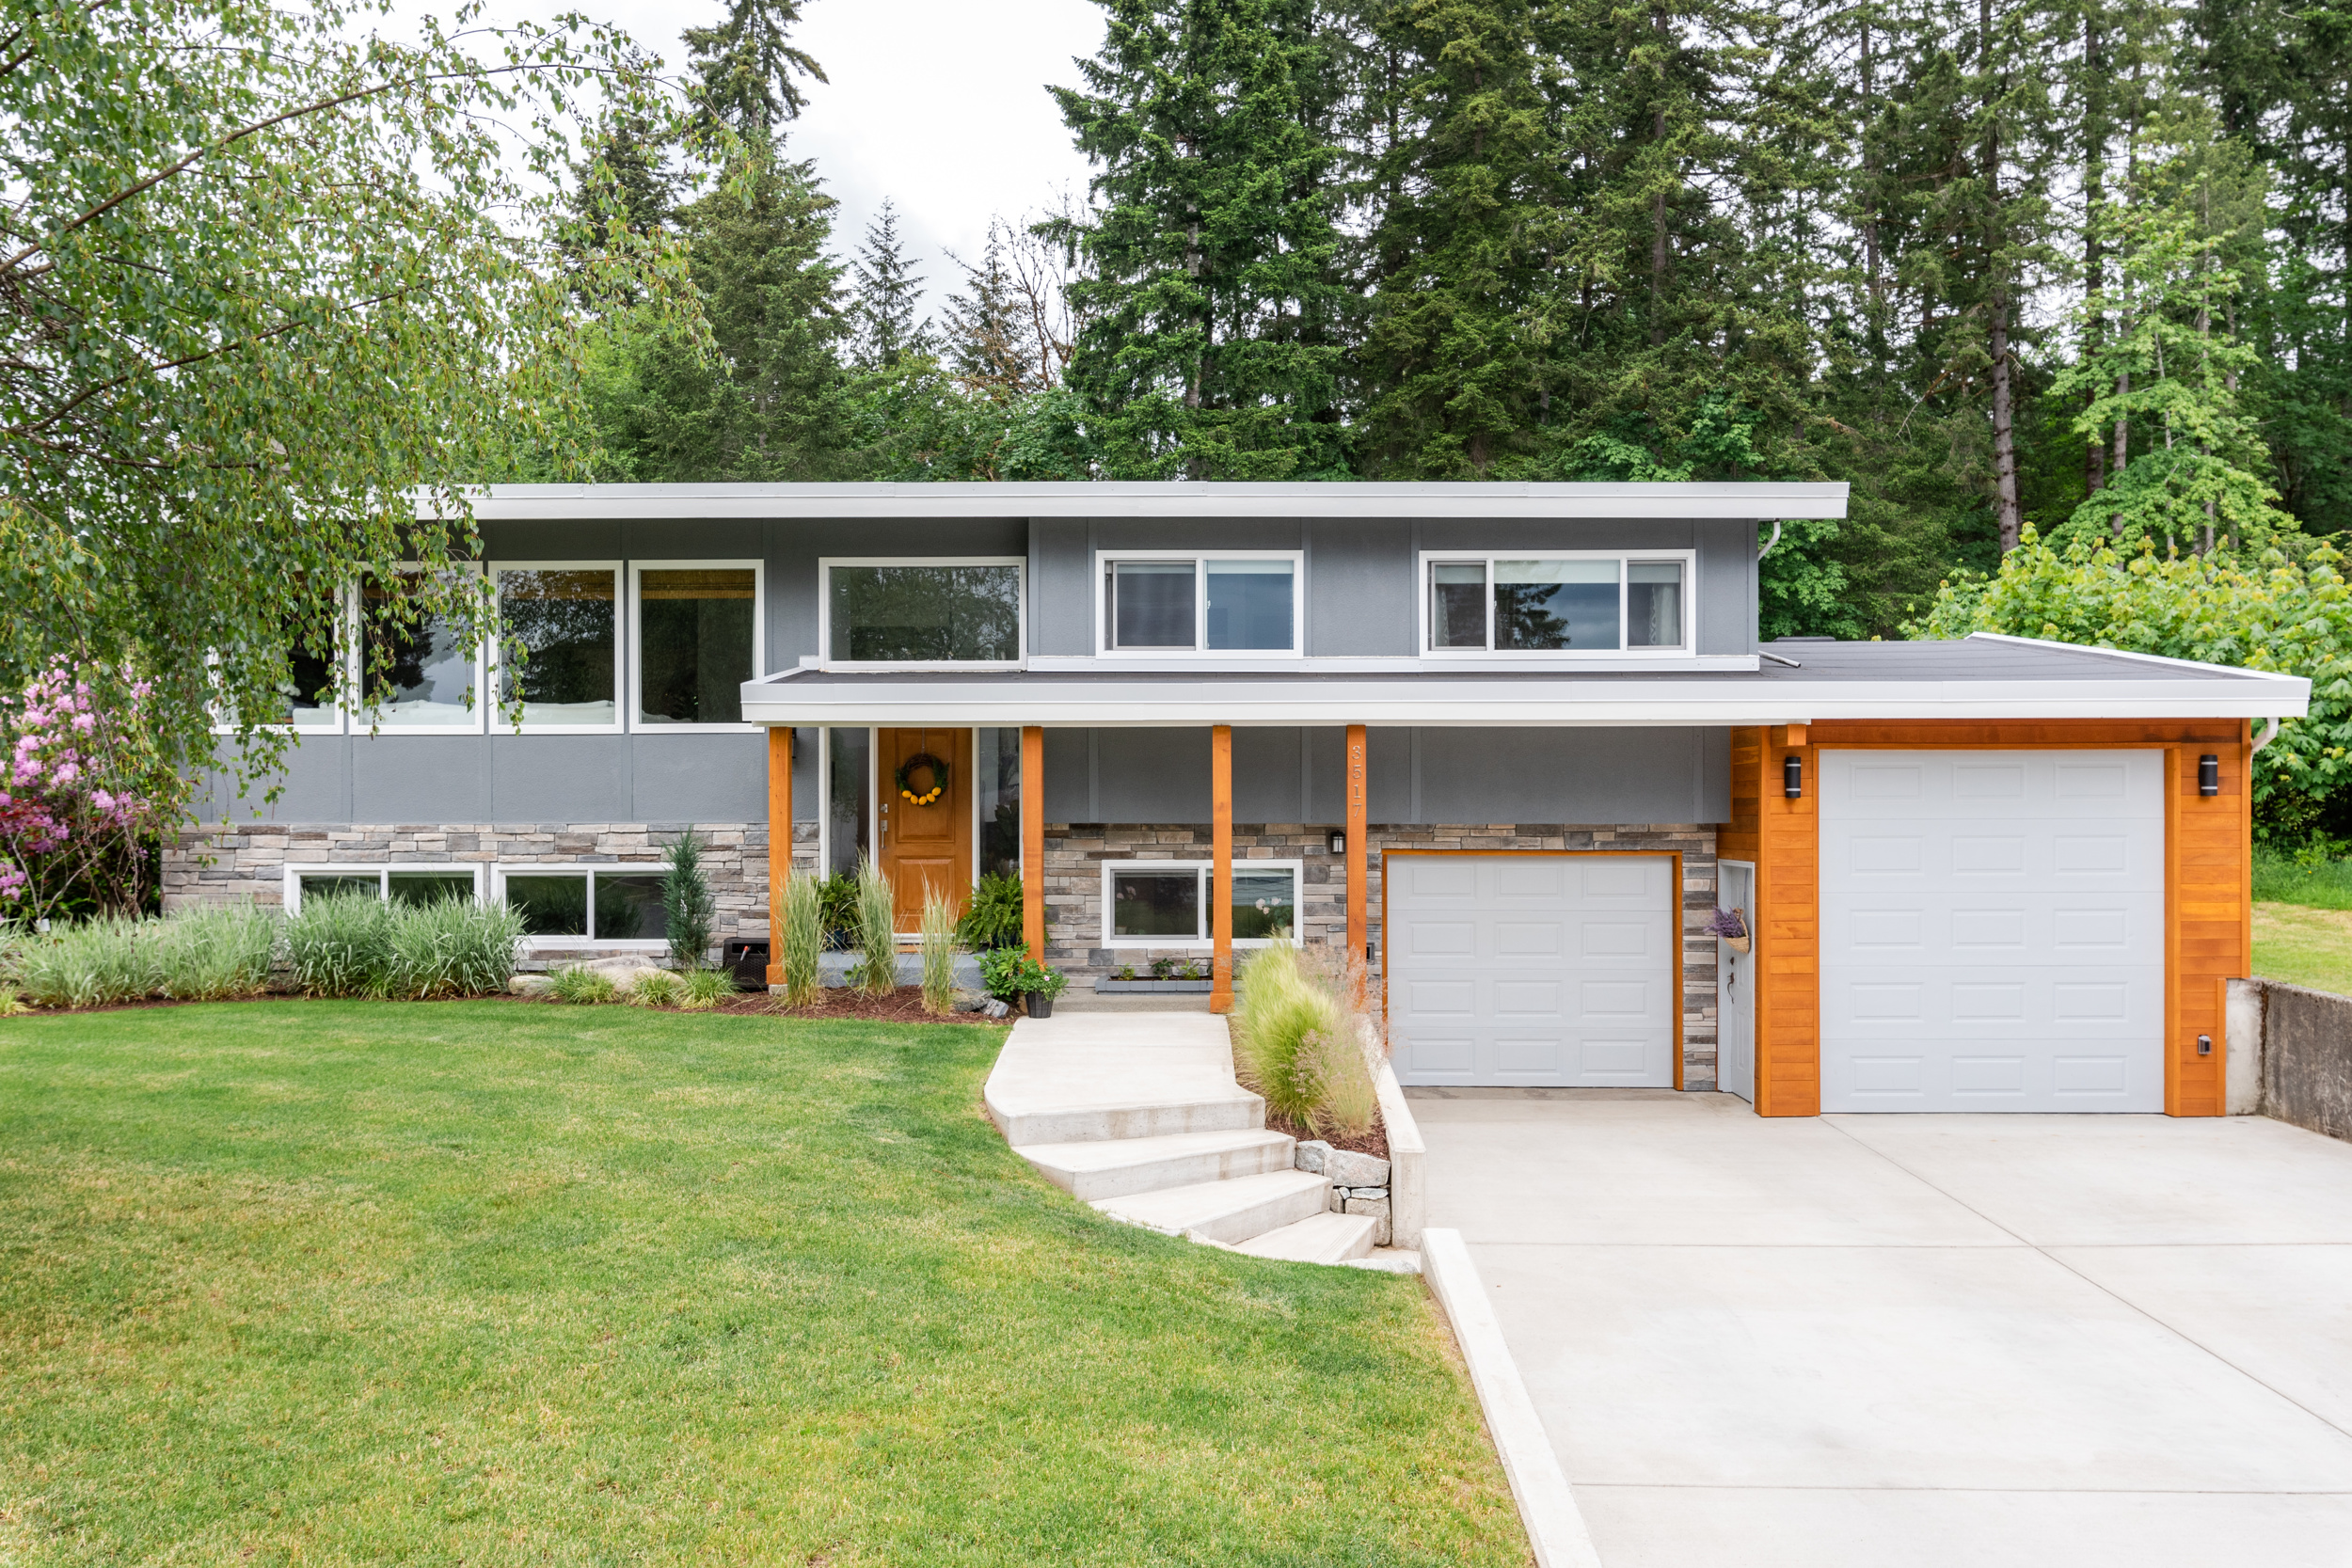 A freshly updated and renovated split level home with cedar and rock accents